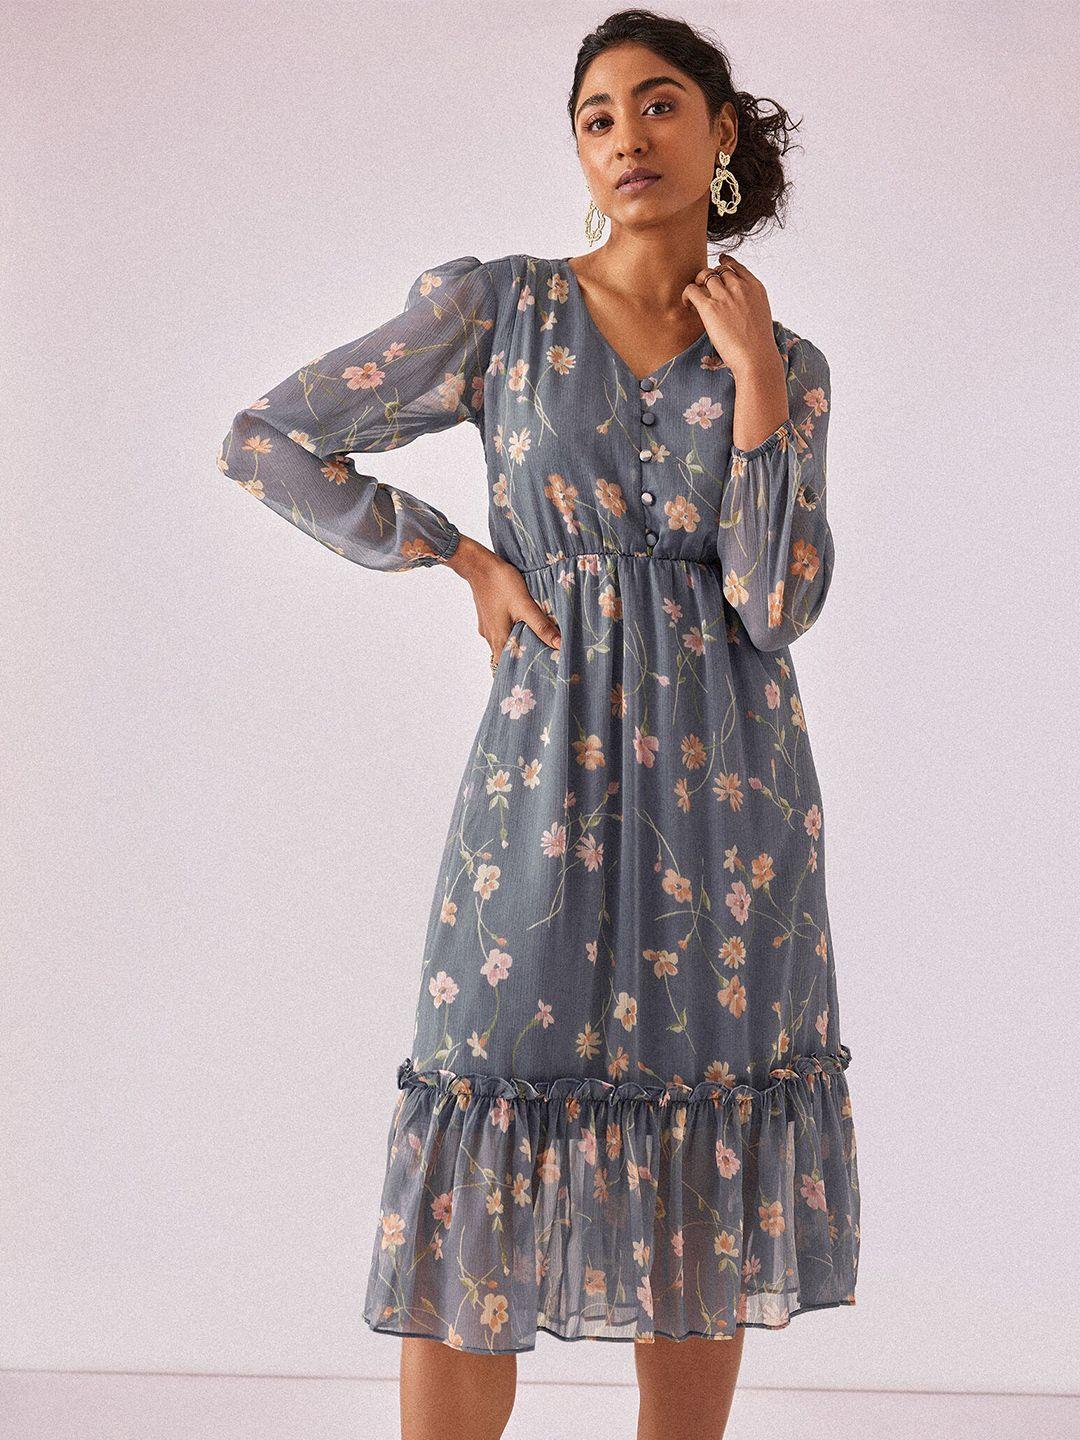 the-label-life-floral-print-fit-&-flare-dress